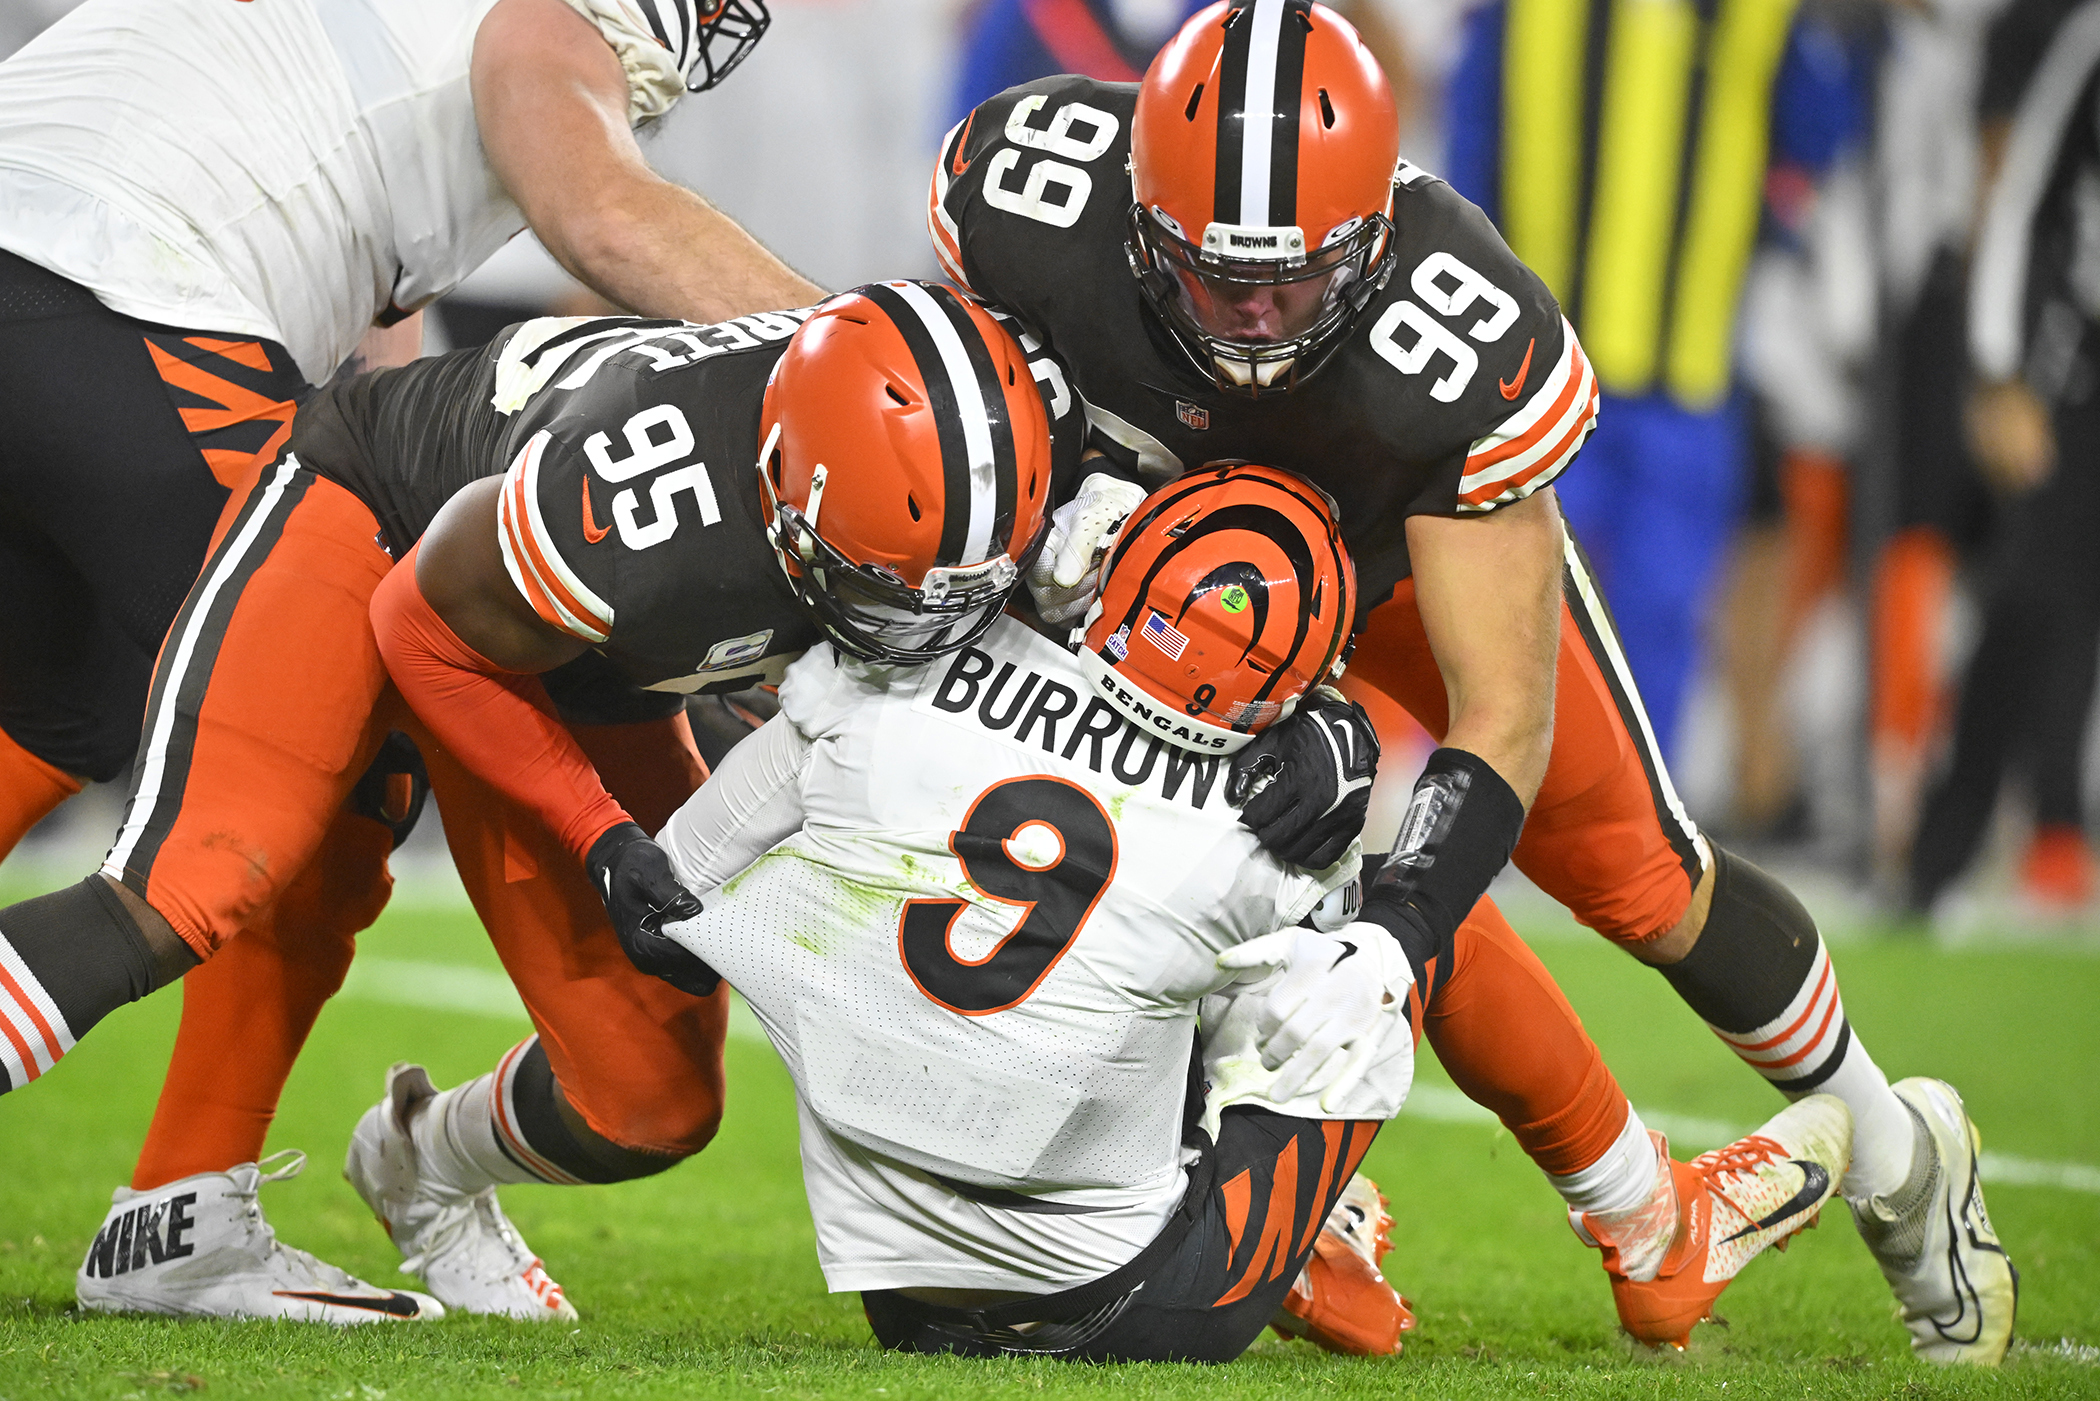 Bengals still struggling against elite pass rushers, with another